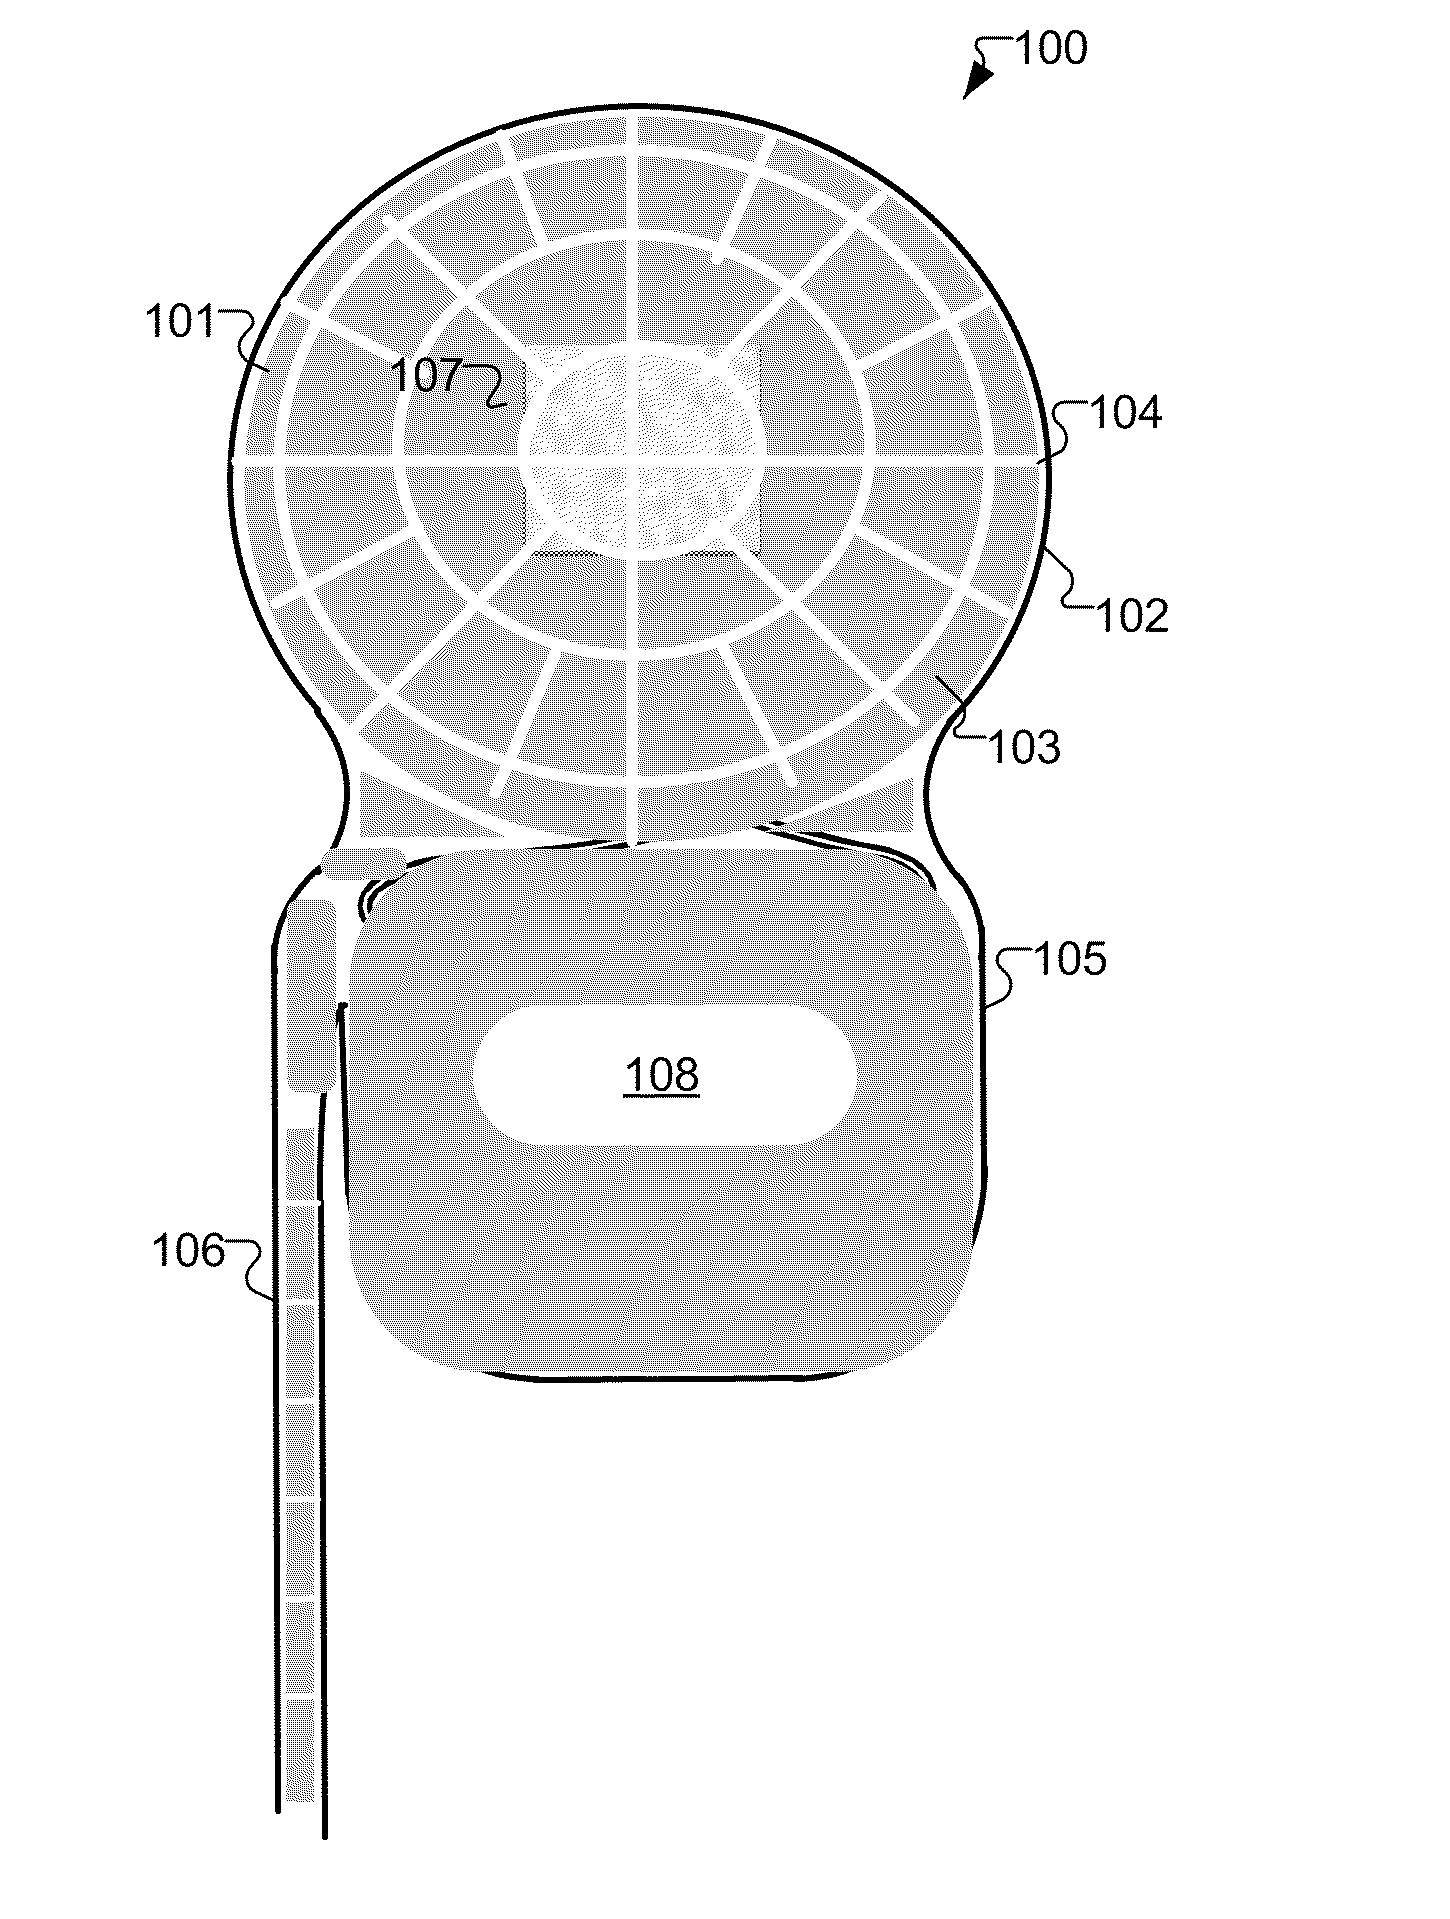 Conductive Coating of Implants with Inductive Link